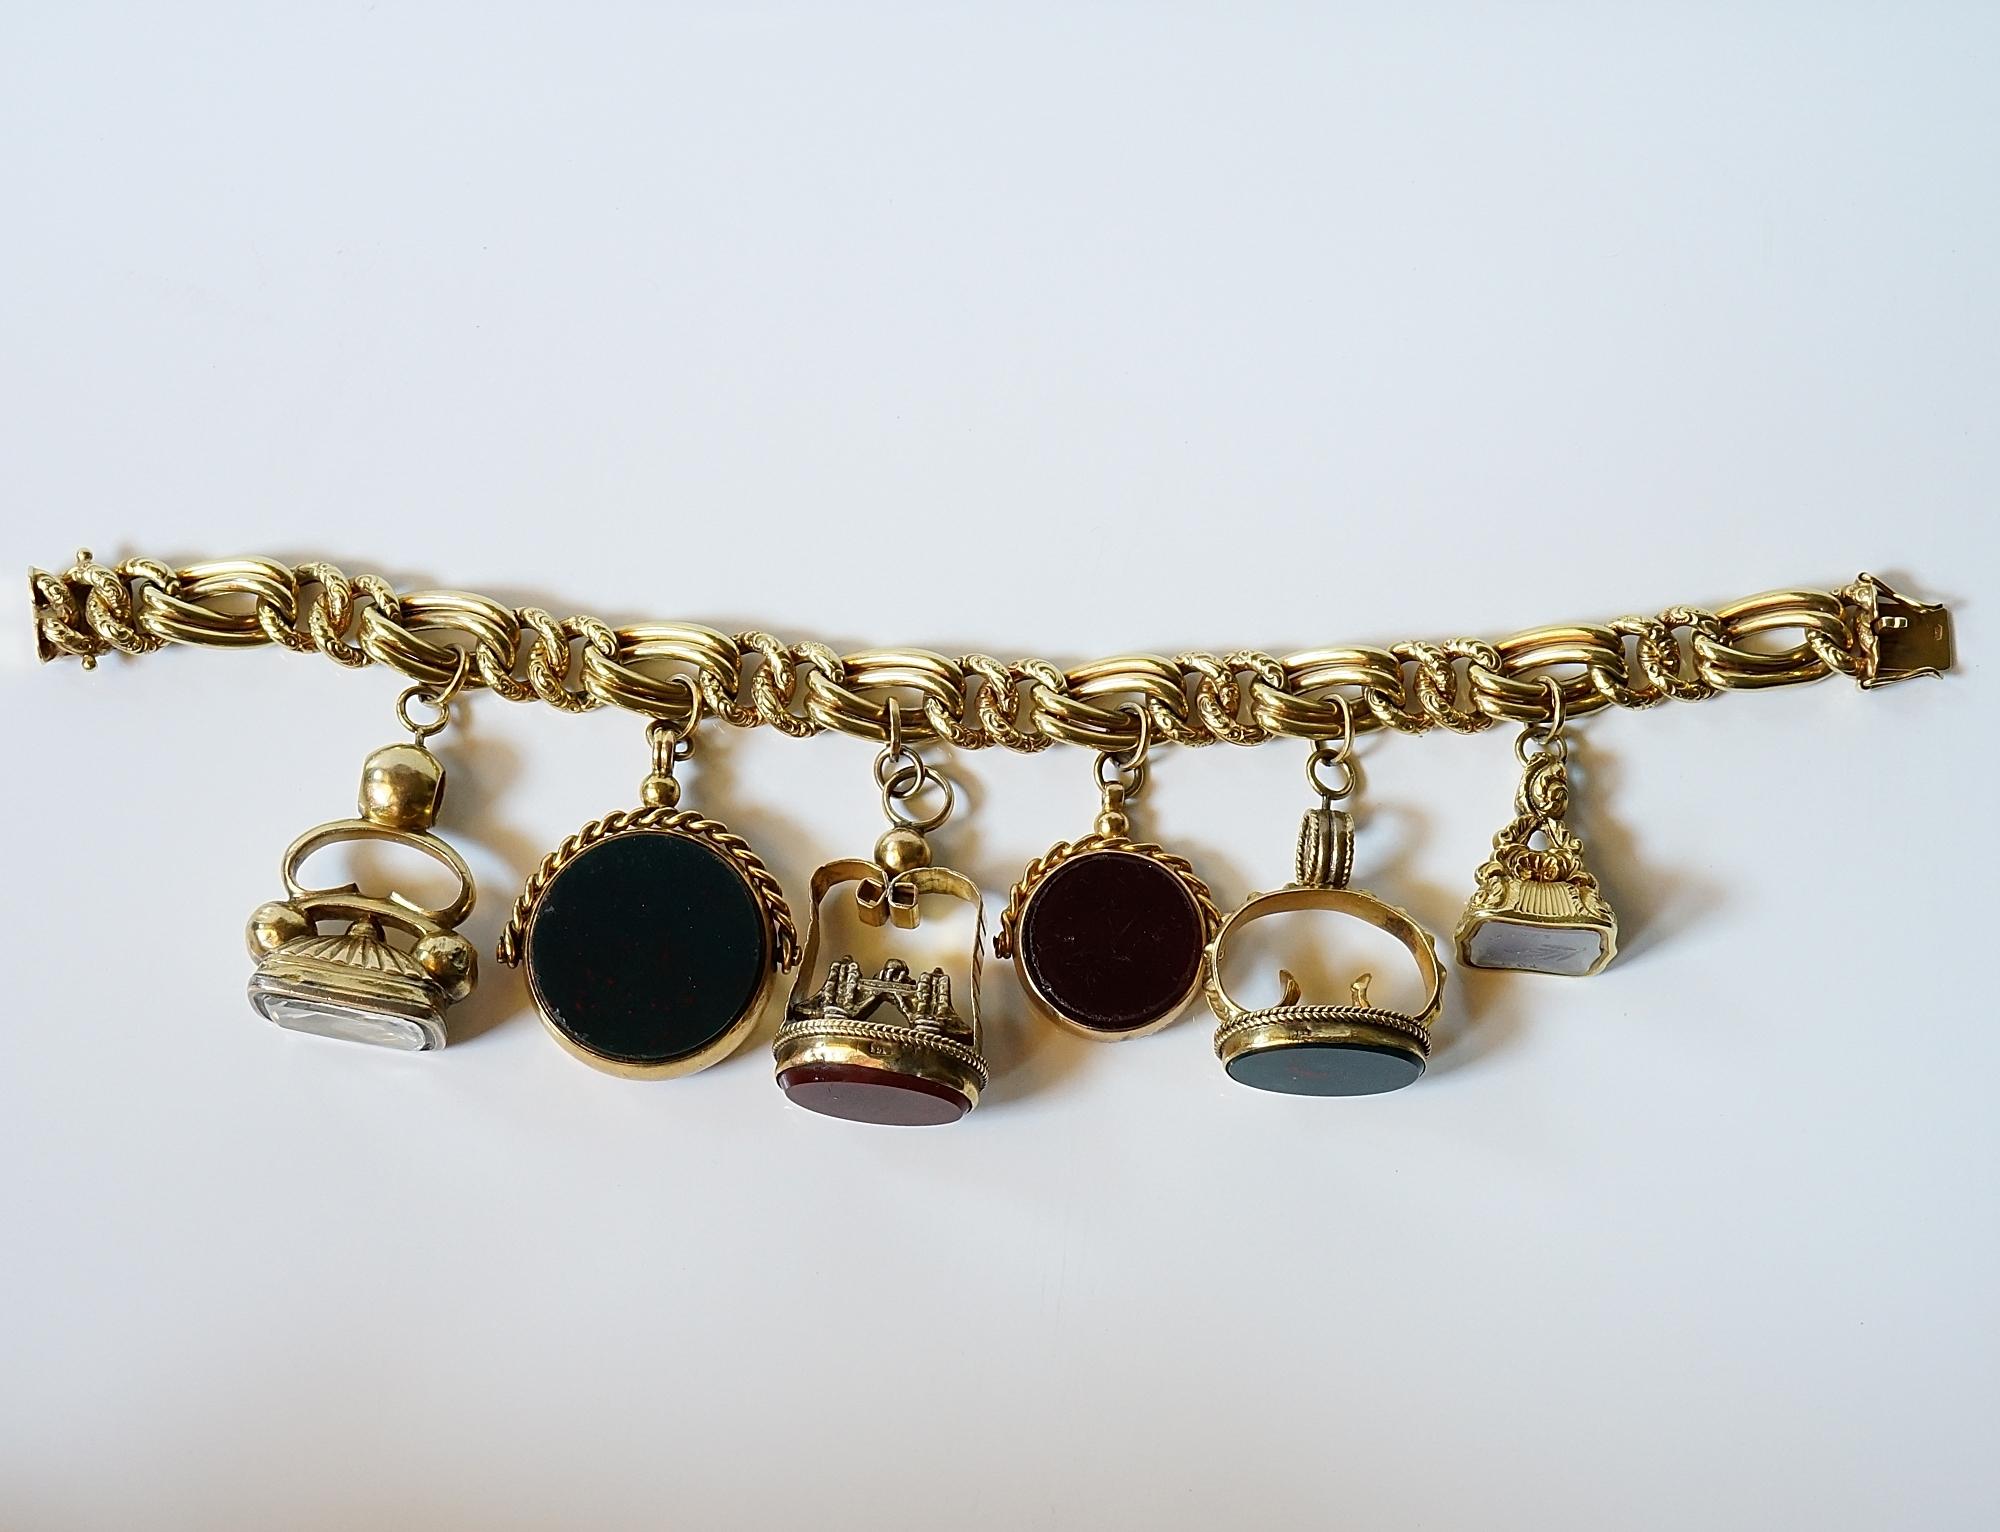 The Old Must!

Large, dramatic, unique, antique, fob charms bracelet hand crafted of solid 14 KT and 9 Kt for two Fobs
Starting from the link bracelet very intricate and different chain bracelet alternating repousse and plain interlaced in between